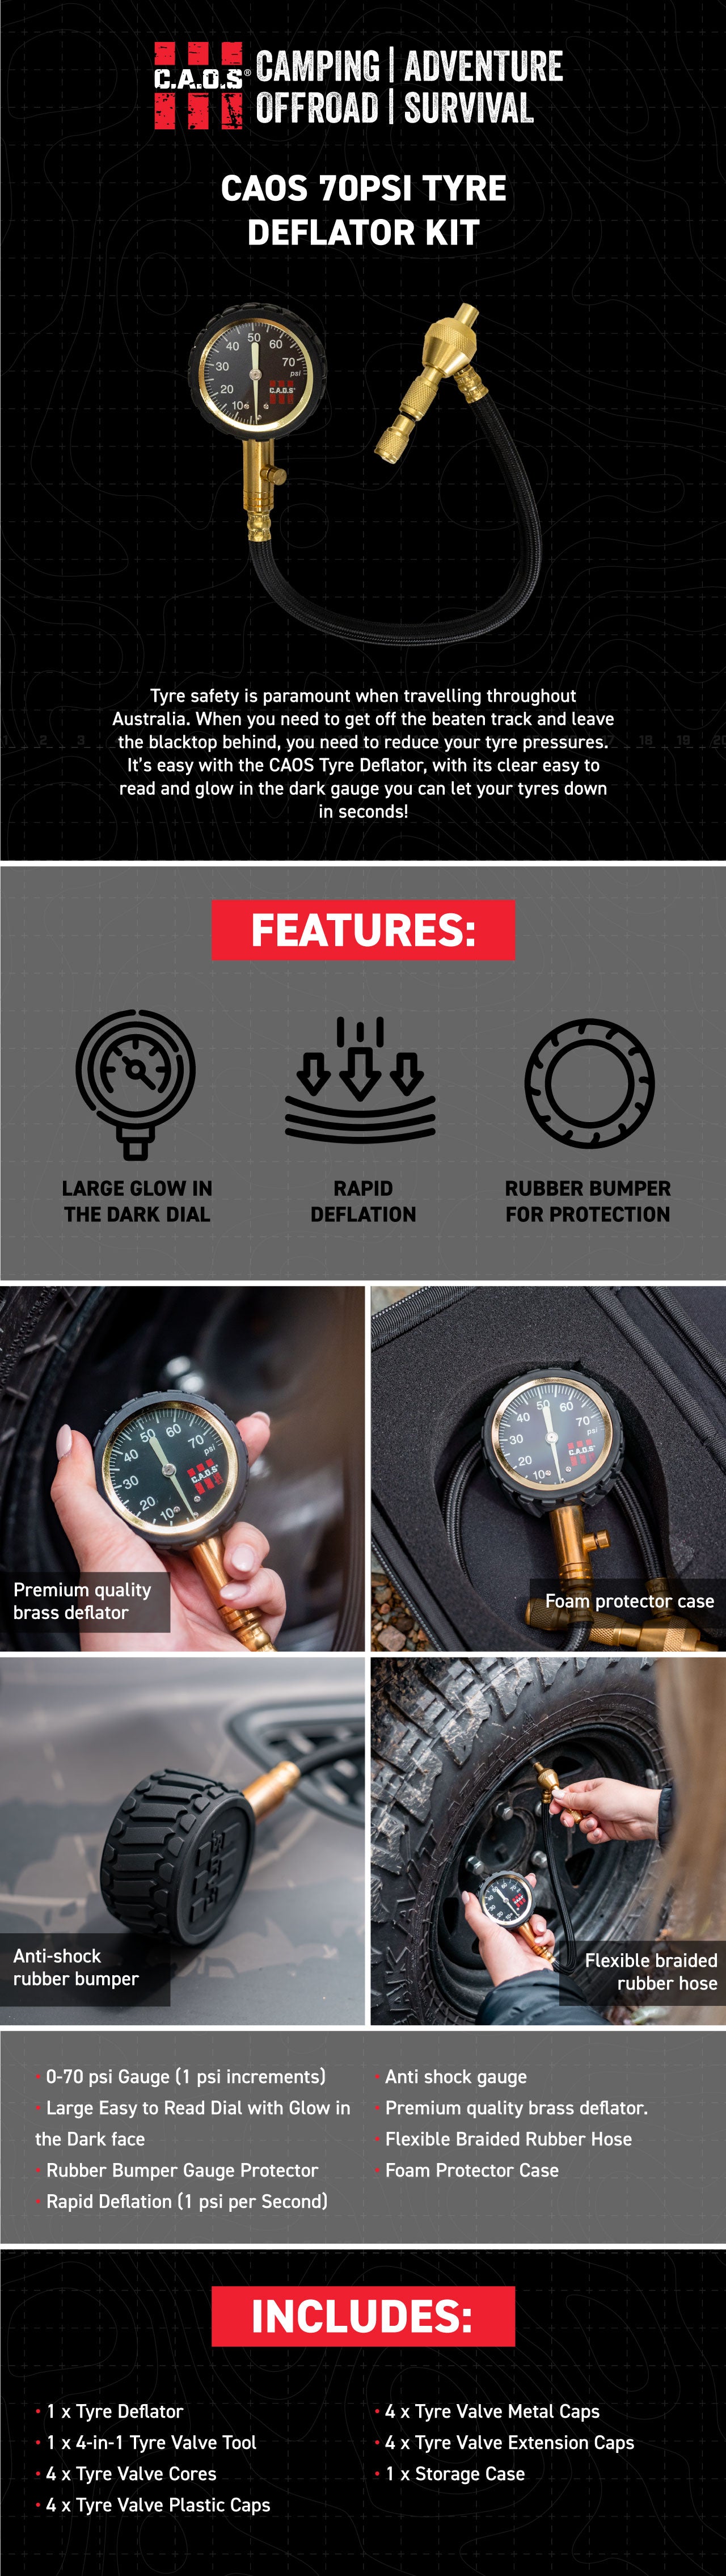 Tyre safety is paramount when travelling throughout Australia. When you need to get off the beaten track and leave the blacktop behind, you need to reduce your tyre pressures. It’s easy with the CAOS Tyre Deflator, with its clear easy to read and glow in the dark gauge you can let your tyres down in seconds!